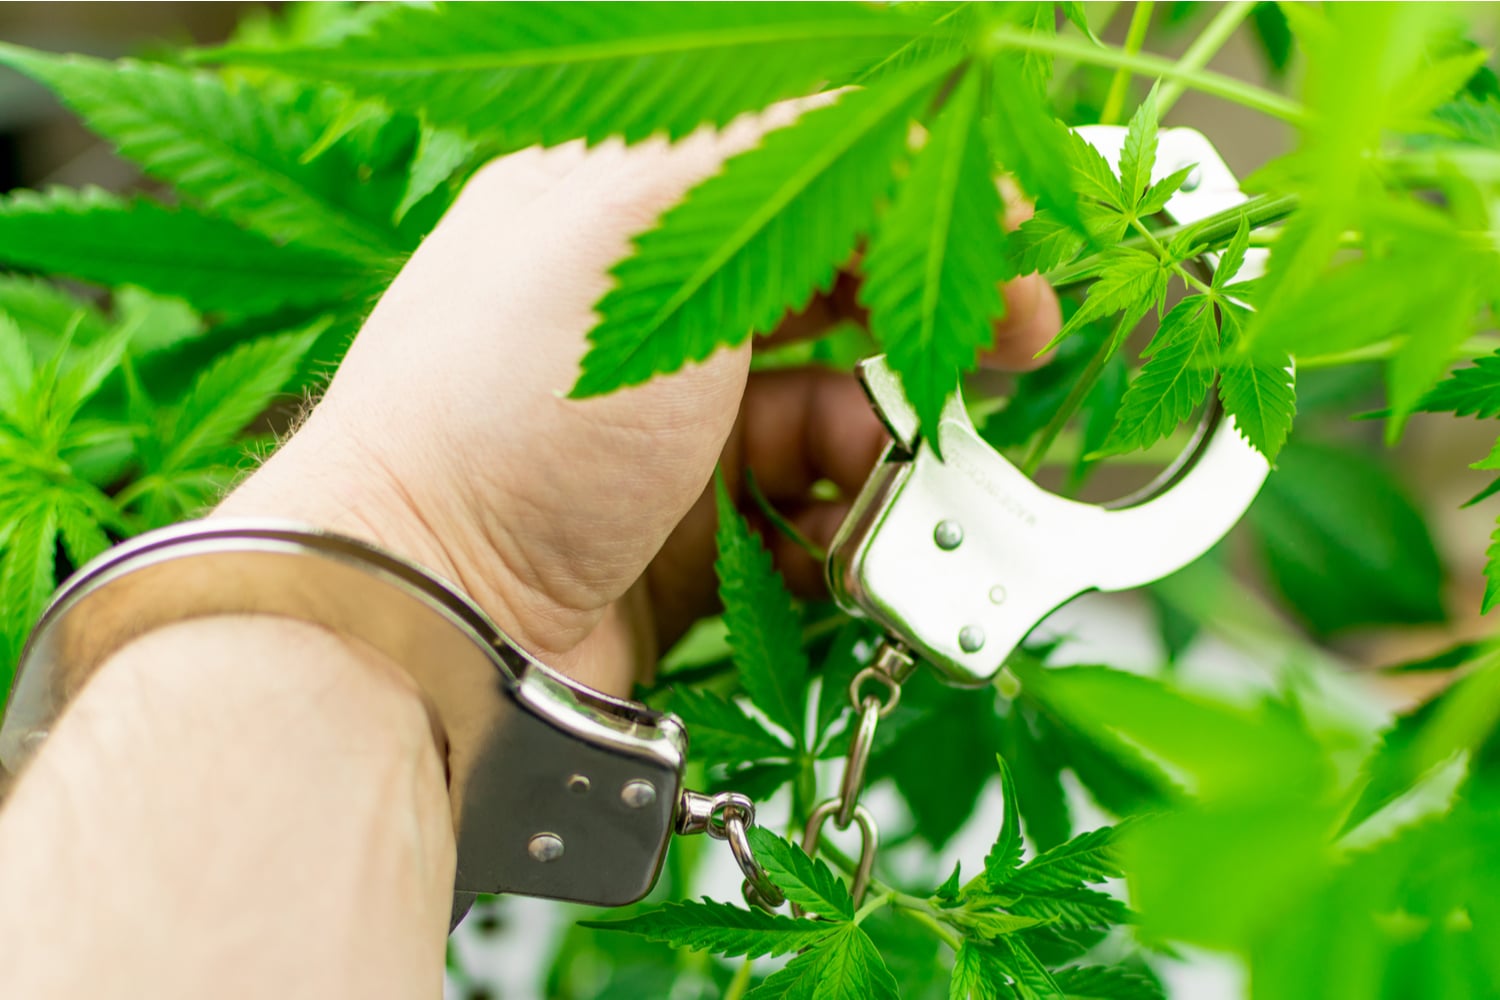 handcuffed to a cannabis plant representing the controlled nature of cannabis